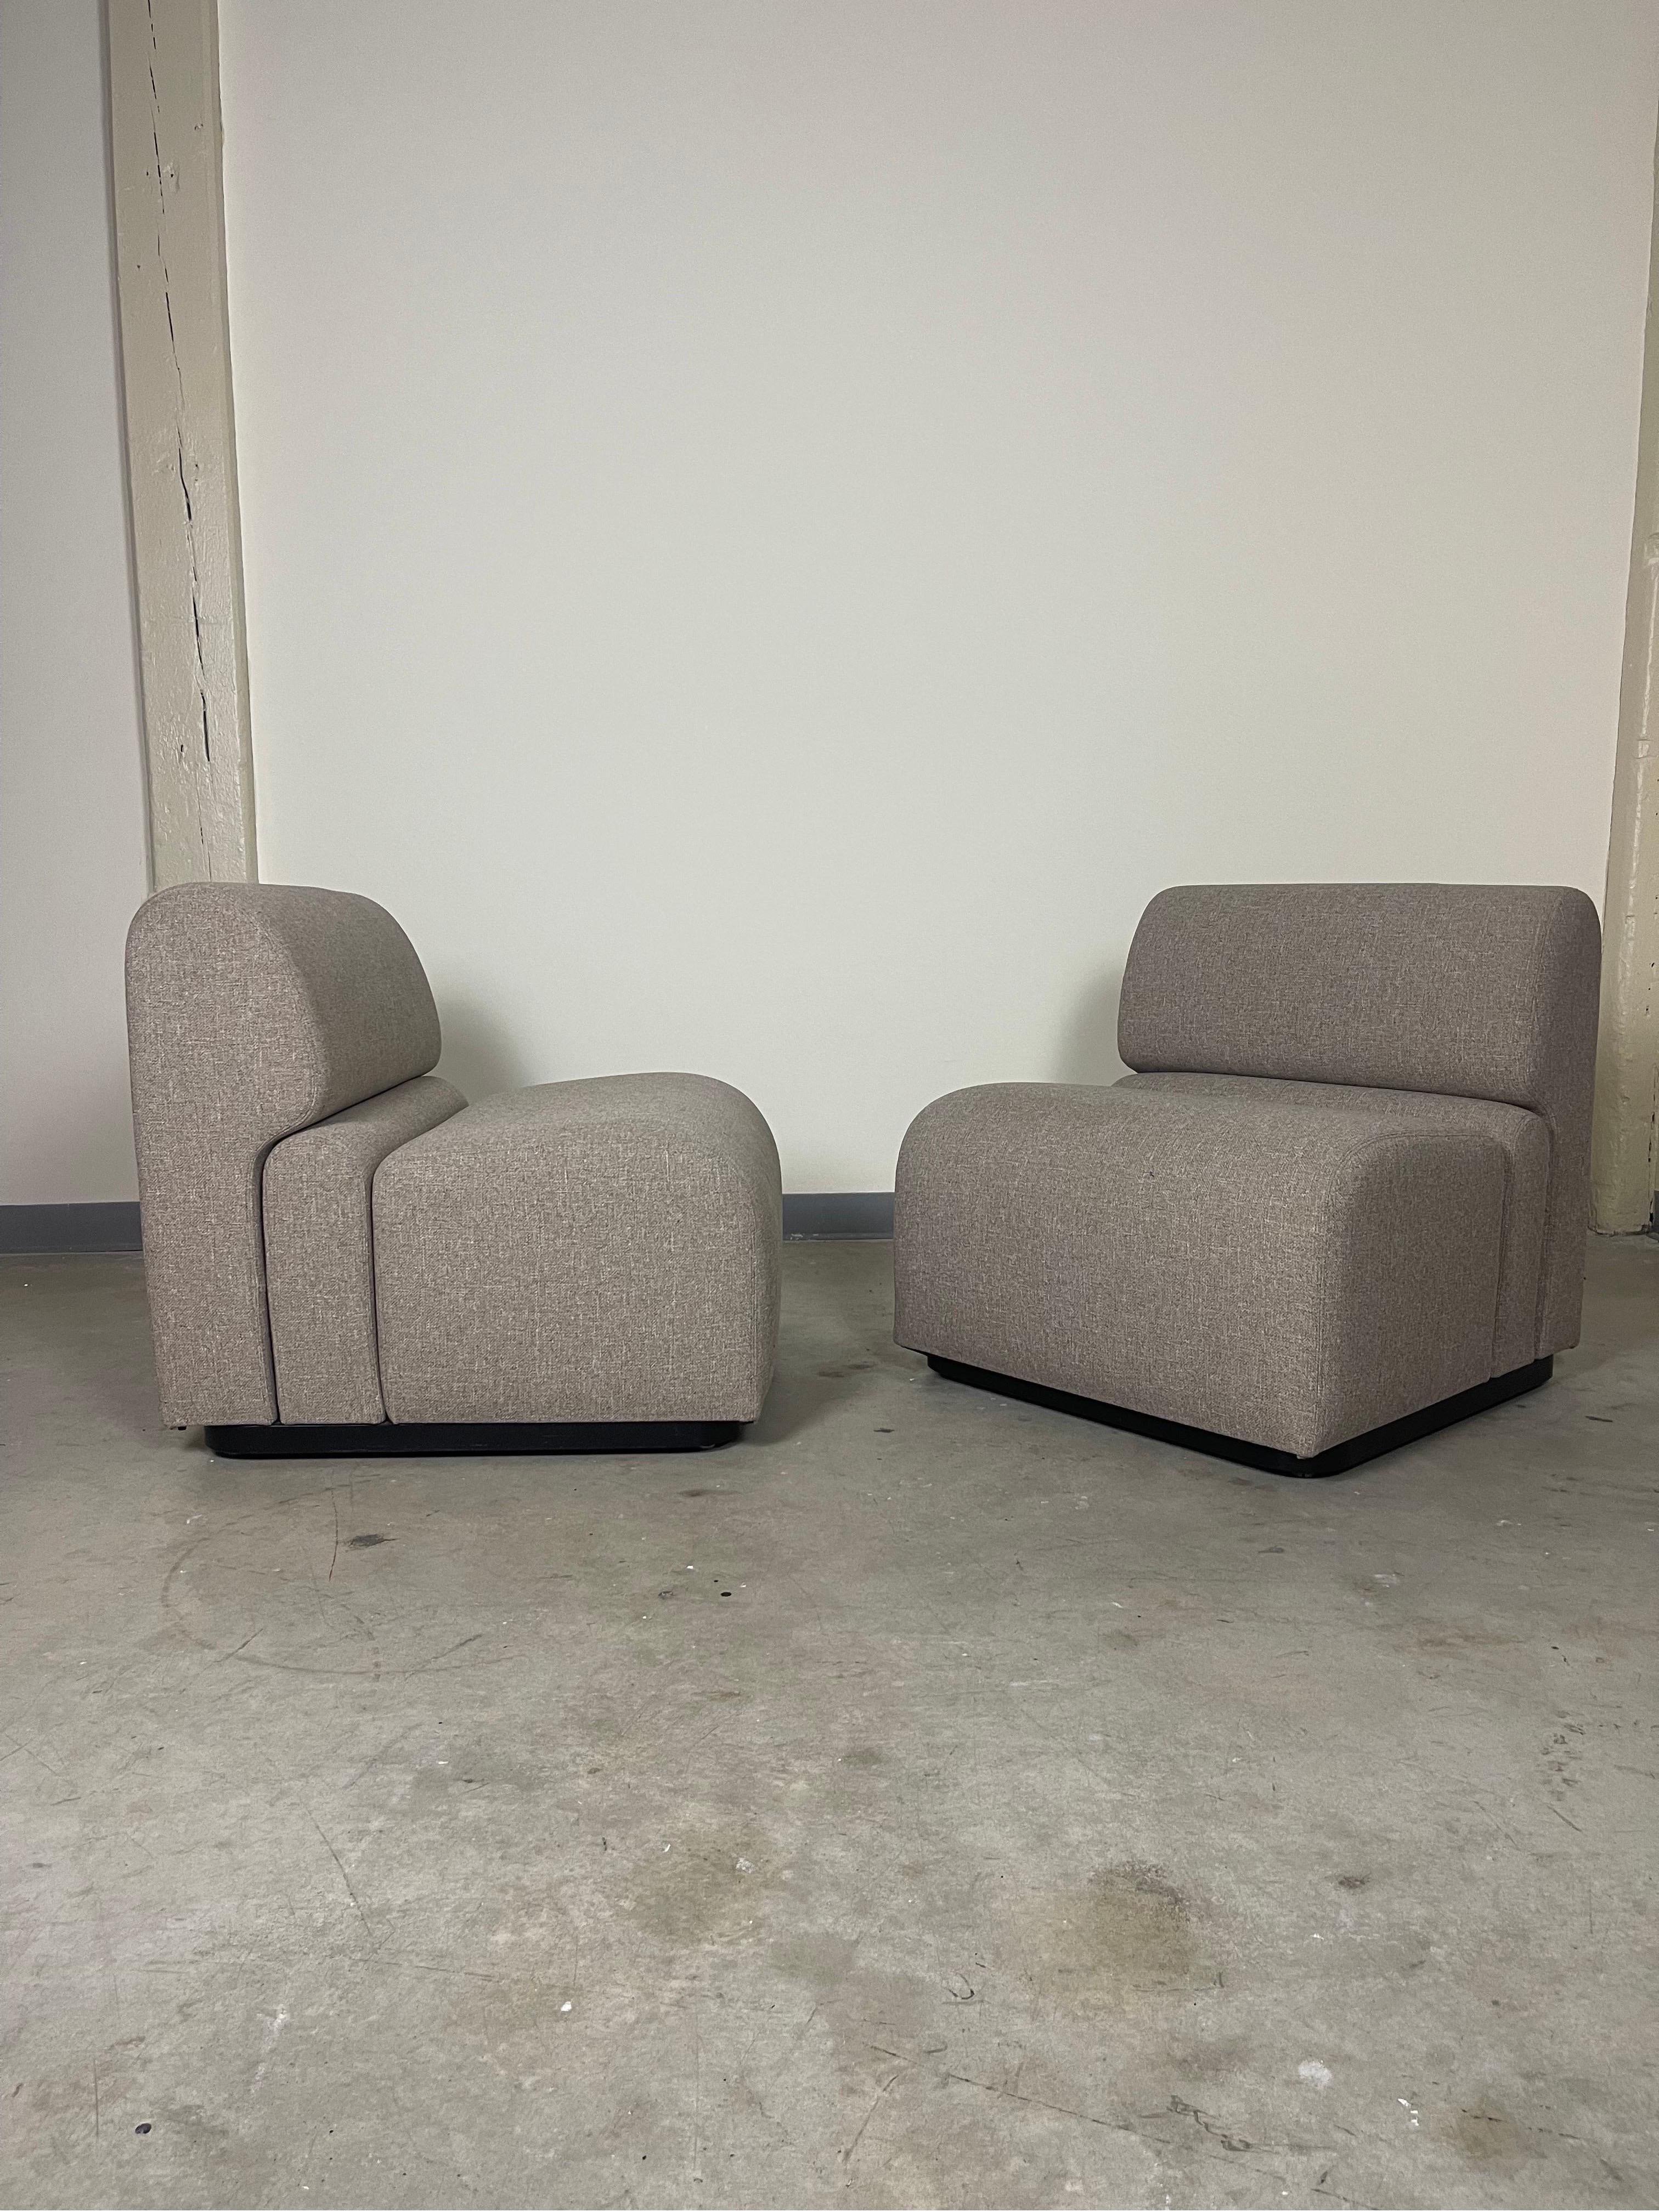 North American Post Modern Wool Slipper Chairs by Jack Cartwright 